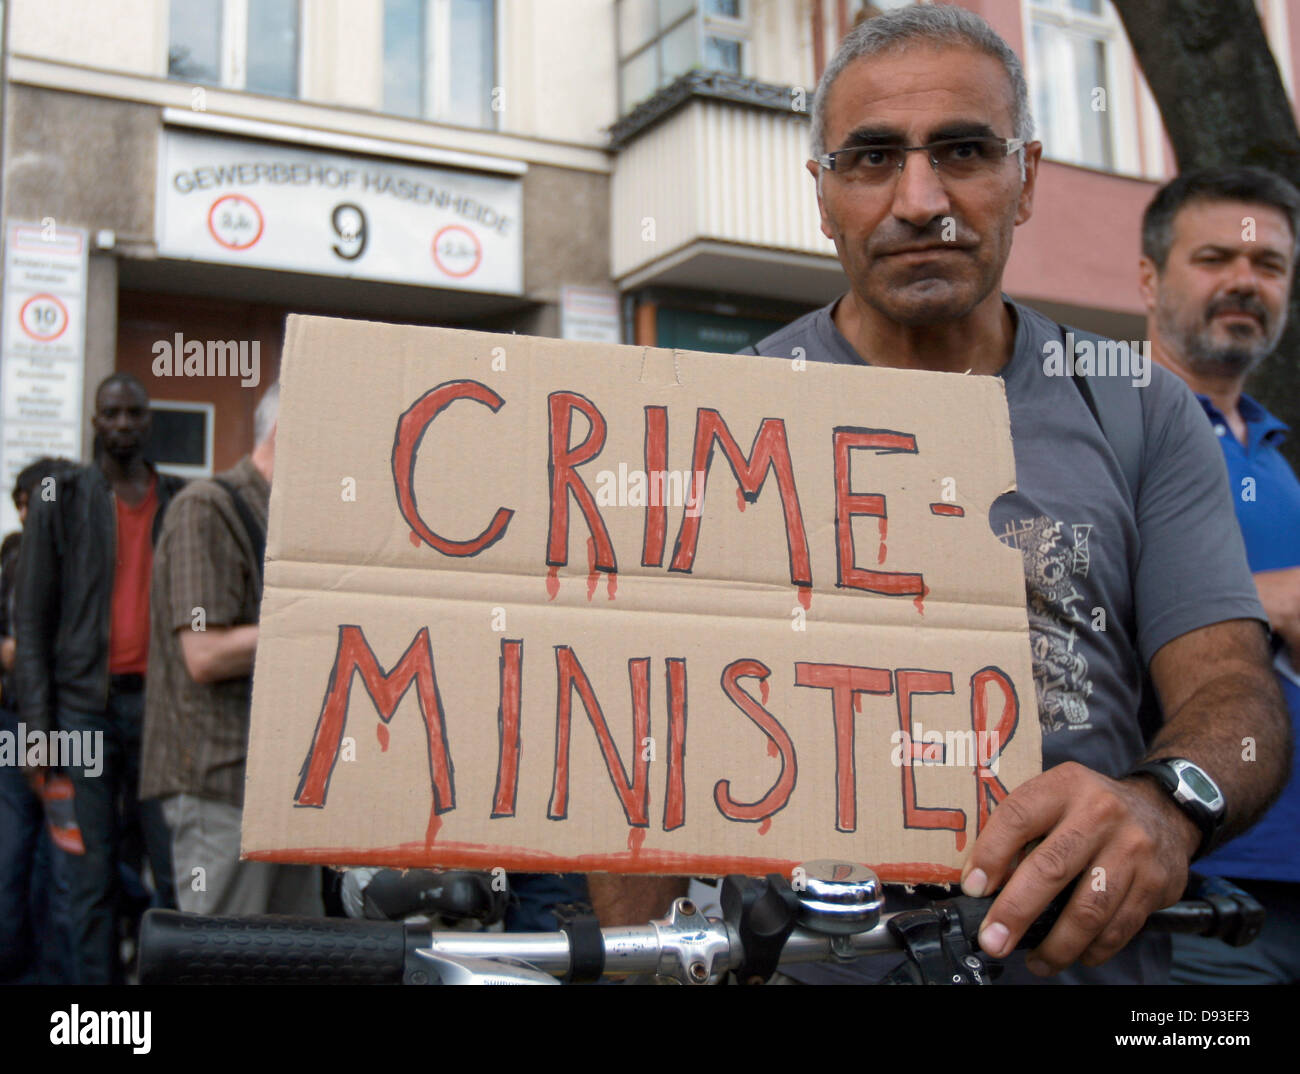 A female demonstrator holds up a placard which reads 'Crime-Minister, as part of a solidarity protest in light of the recent violence against activists in Turkey in Berlin, Germany, 9 June 2013. The protest is directed against the recent police violence against activists in Turkey who have staged protest against the politics of the Turkish President Erdogan. Photo: Joanna Scheffel Stock Photo